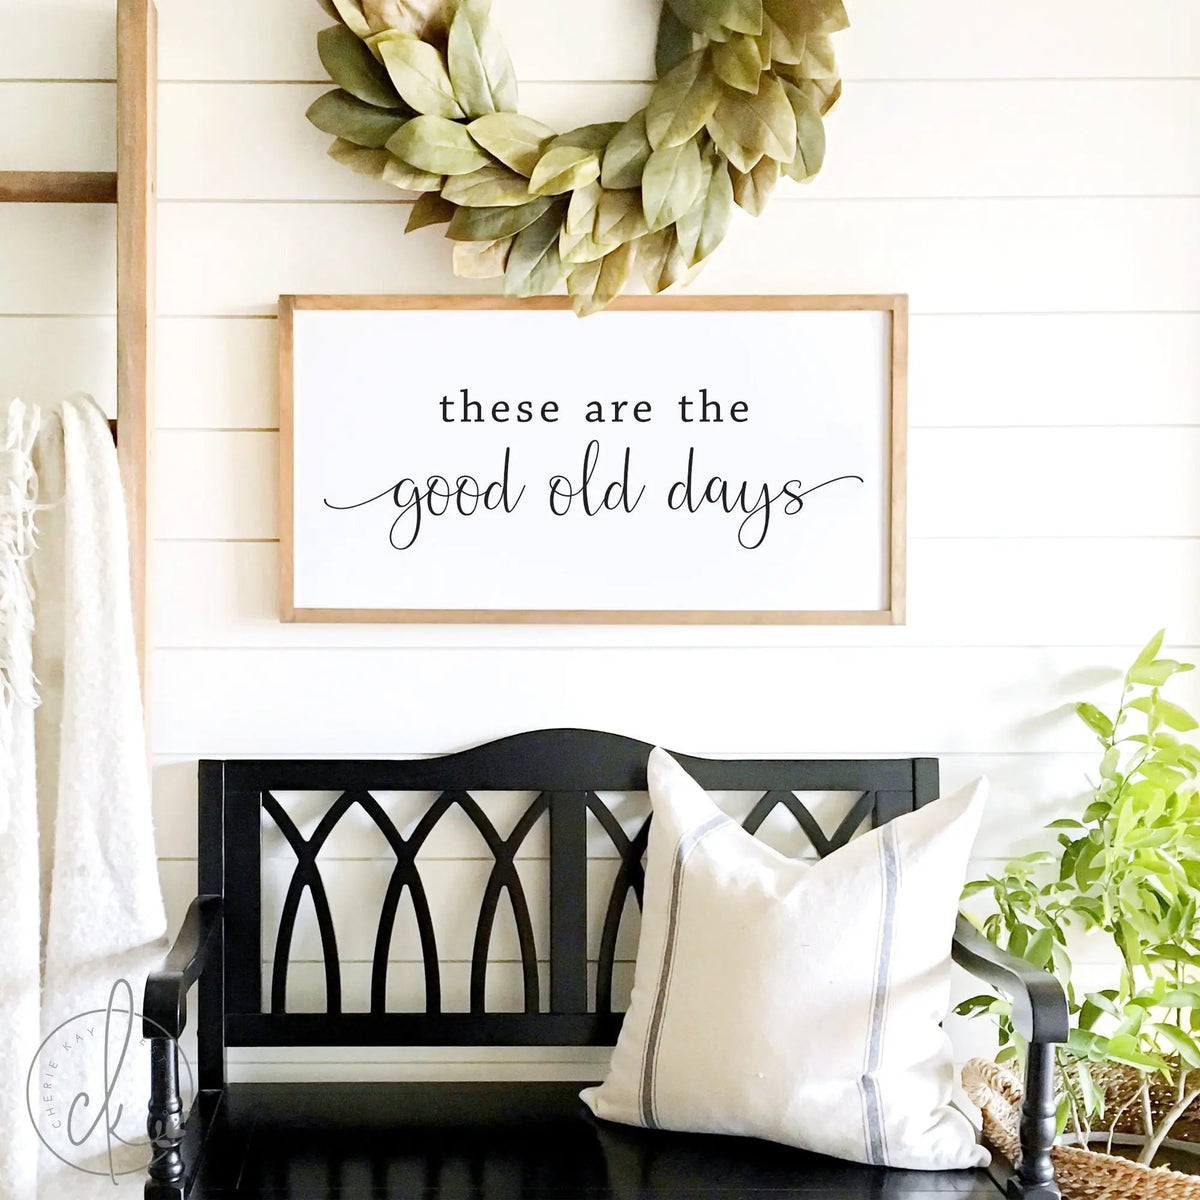 These are the good old days sign | wood signs | inspirational signs | living room decor | good old days sign | farmhouse sign